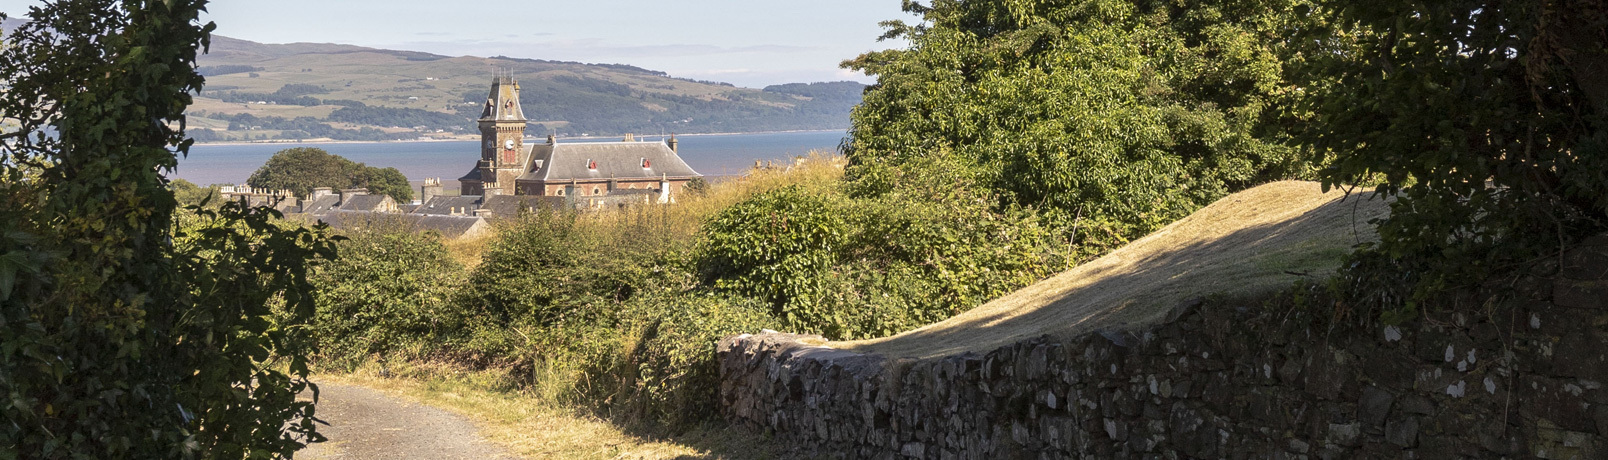 A view down a rural country lane, Wigtown County Buildings and house rooftops sit in the background against the Wigtown Bay and Galloway Hills.